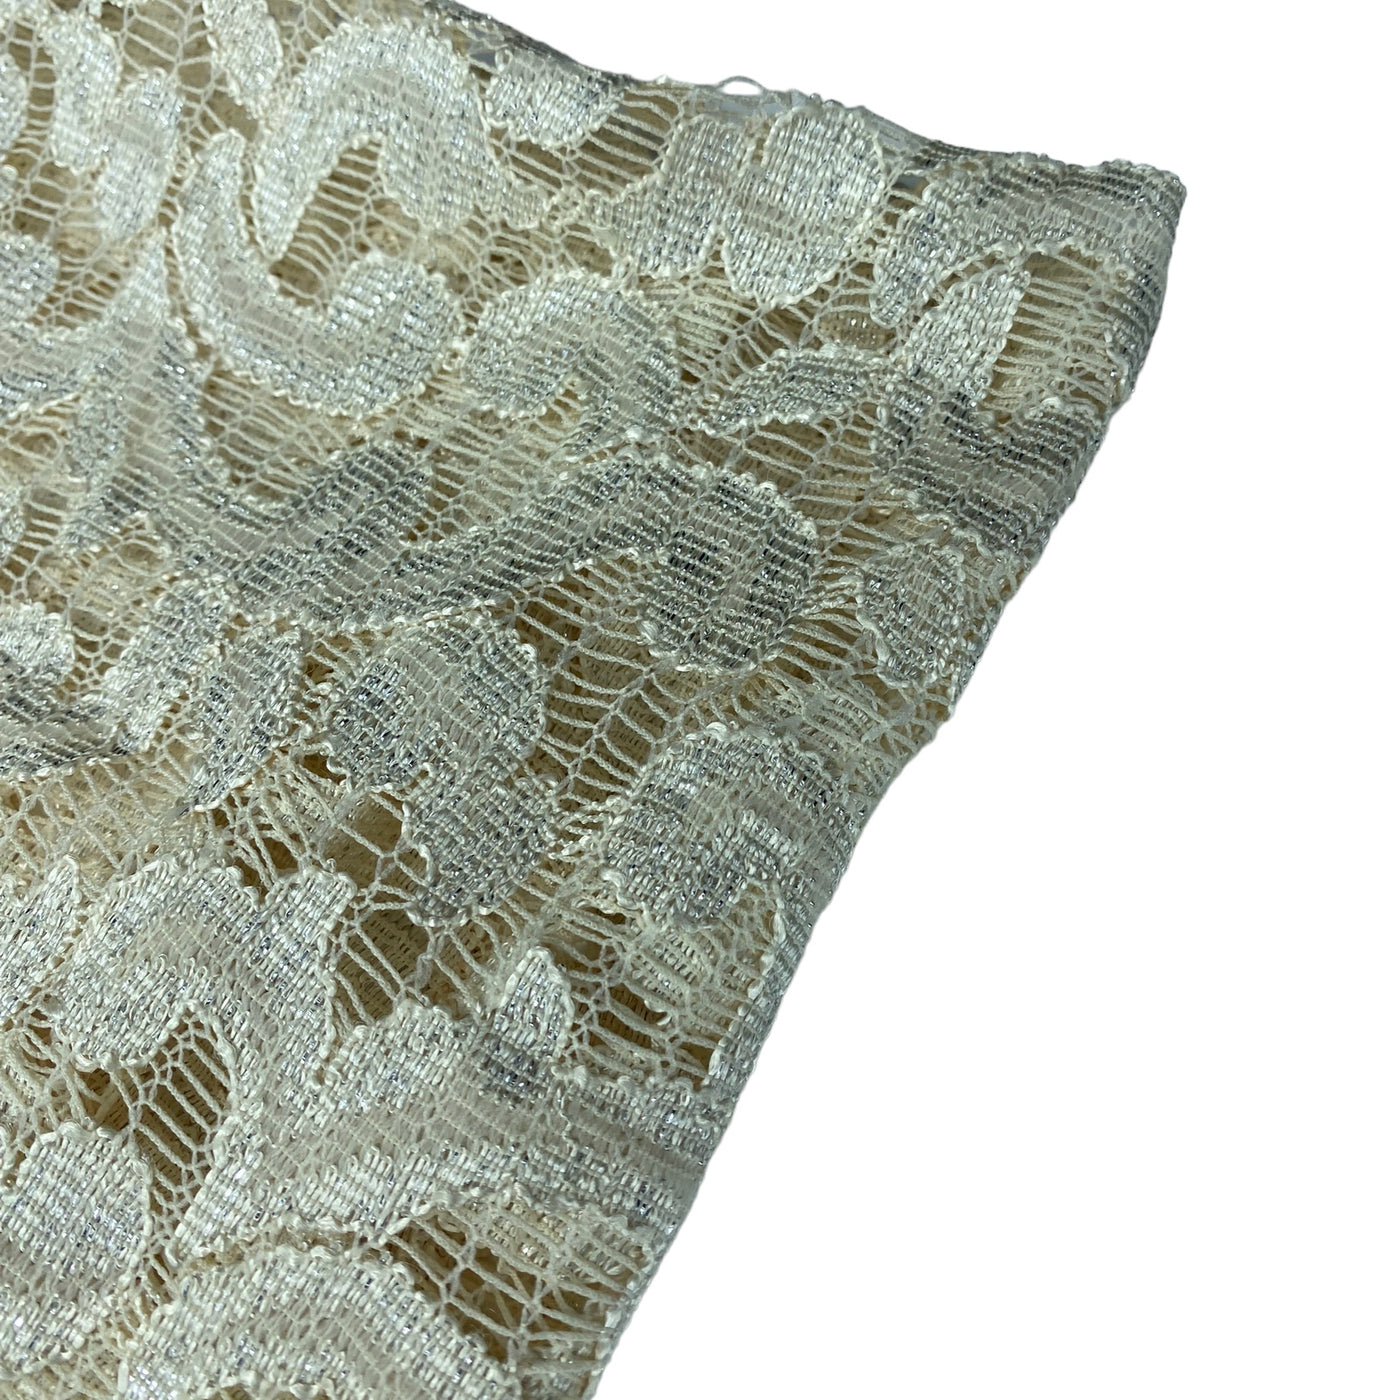 Corded Lace - Ivory/Silver